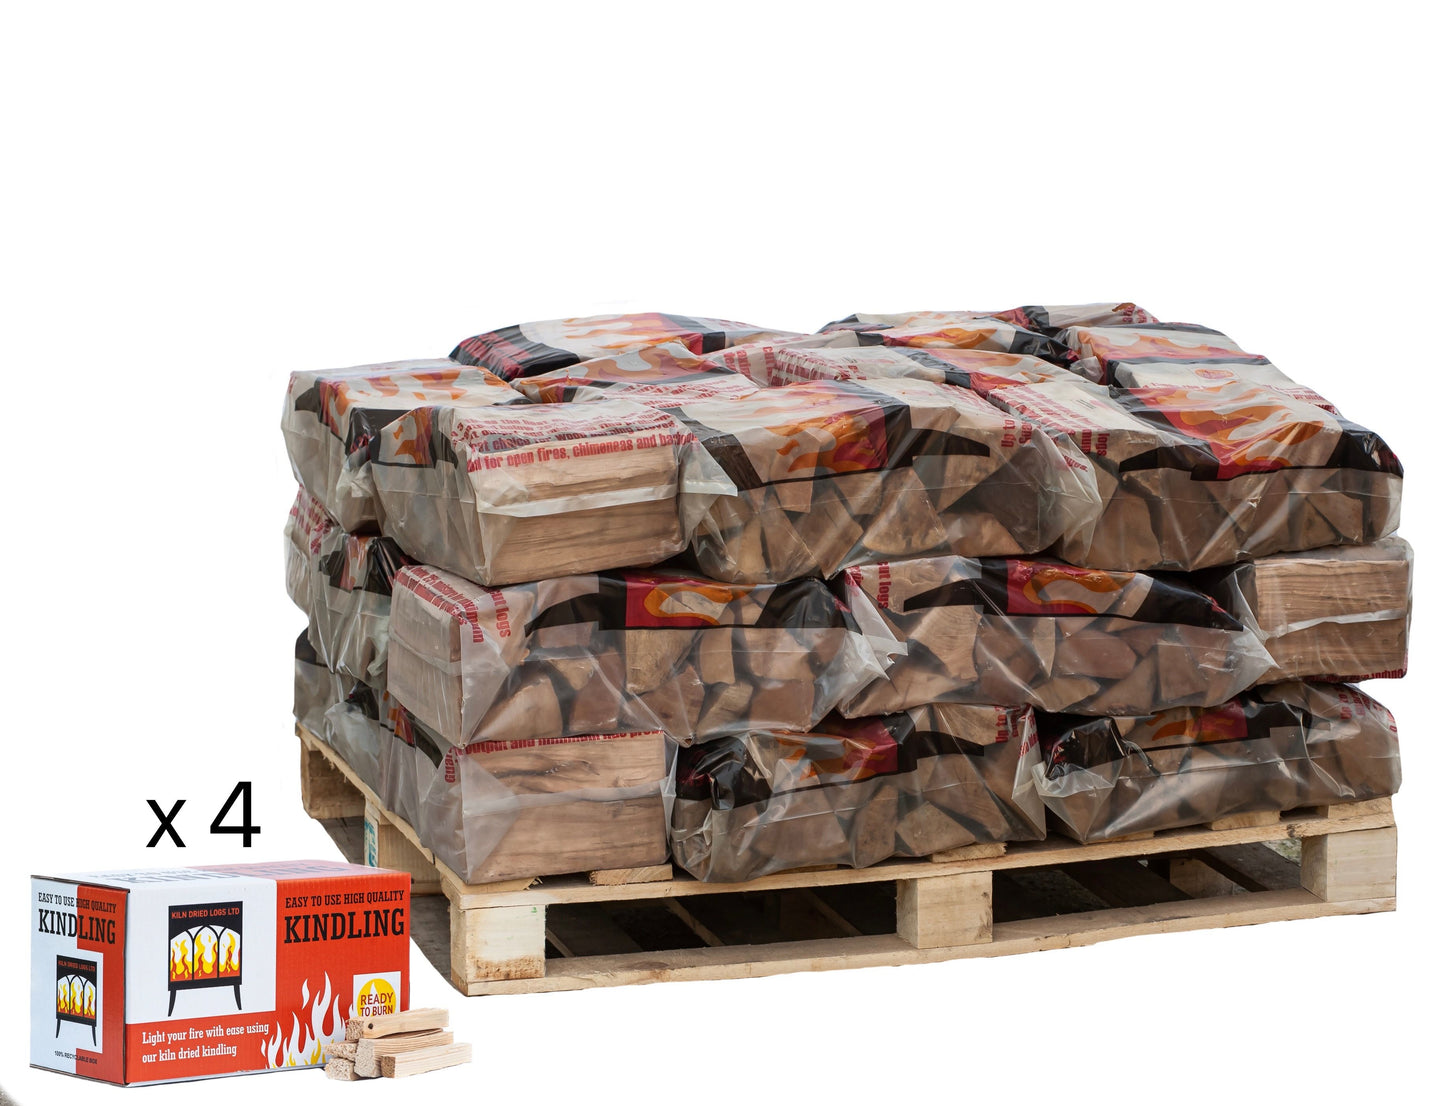 Premium Quality Kiln Dried Hardwood Logs Oak Beech and Hornbeam Pallet of 30 bags with 4 boxes of Kindling